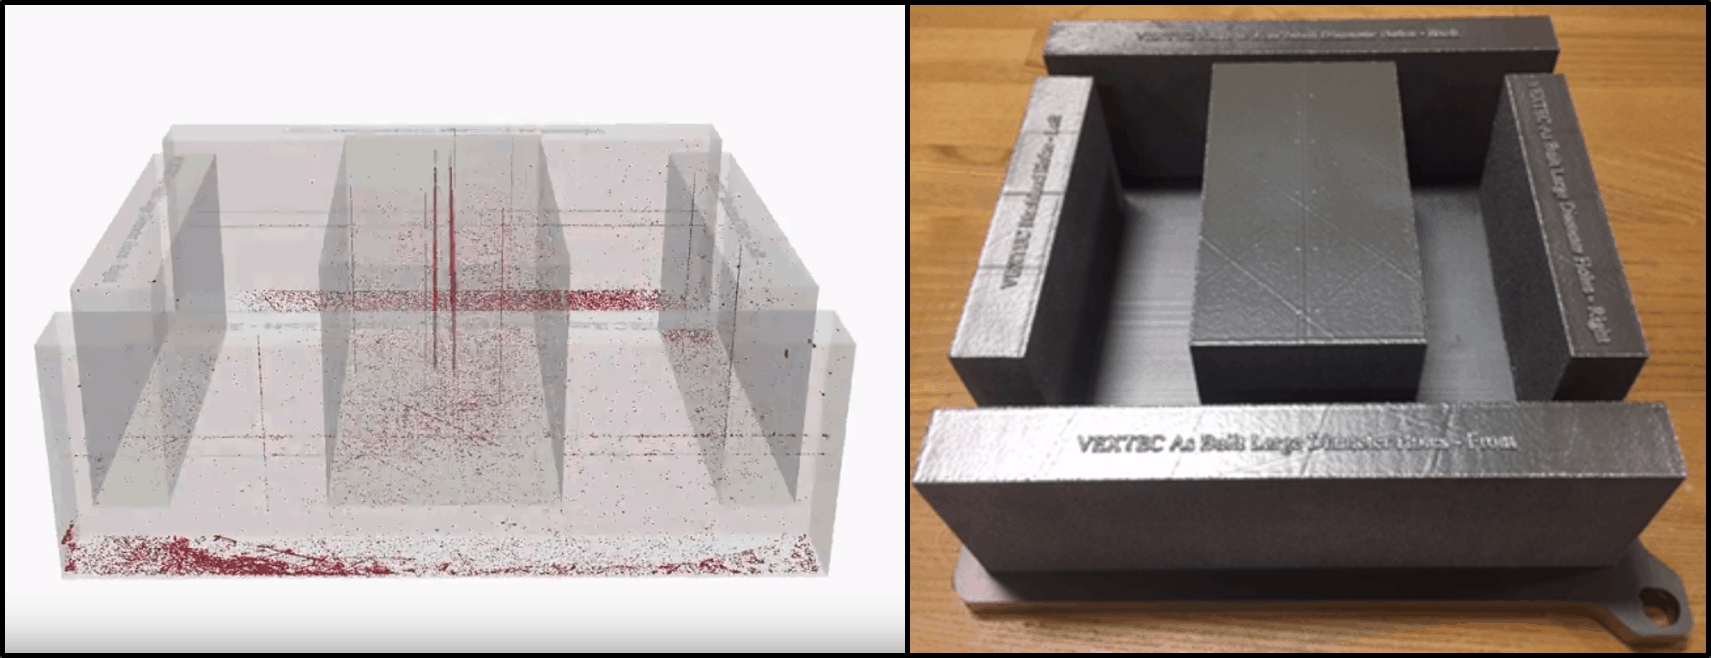 Digital visualization of additively-manufactured Ti-6Al-4V blocks (with porosity), and the physically-built product.